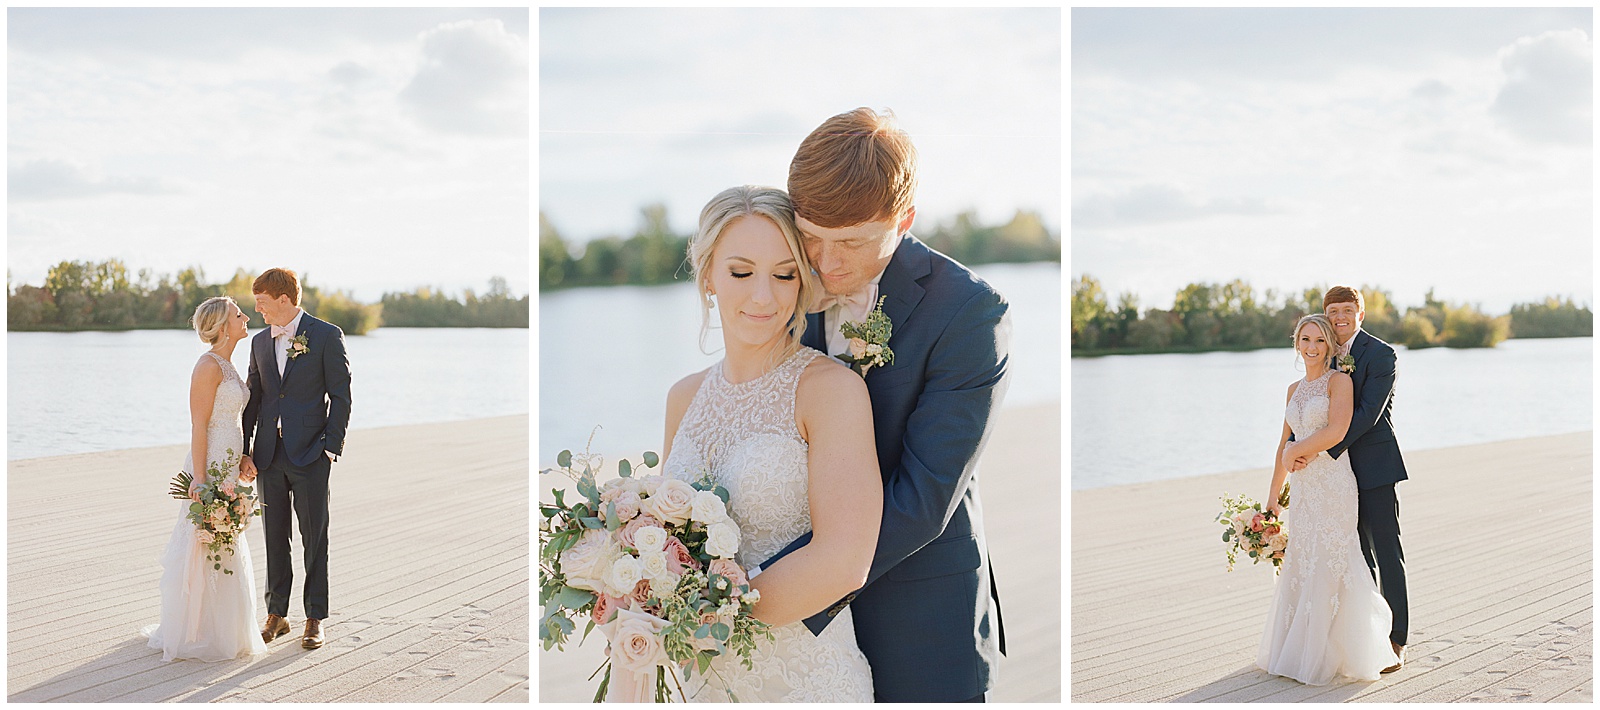 10 Things I learned from our Wedding Day - Karli Elliott Photography